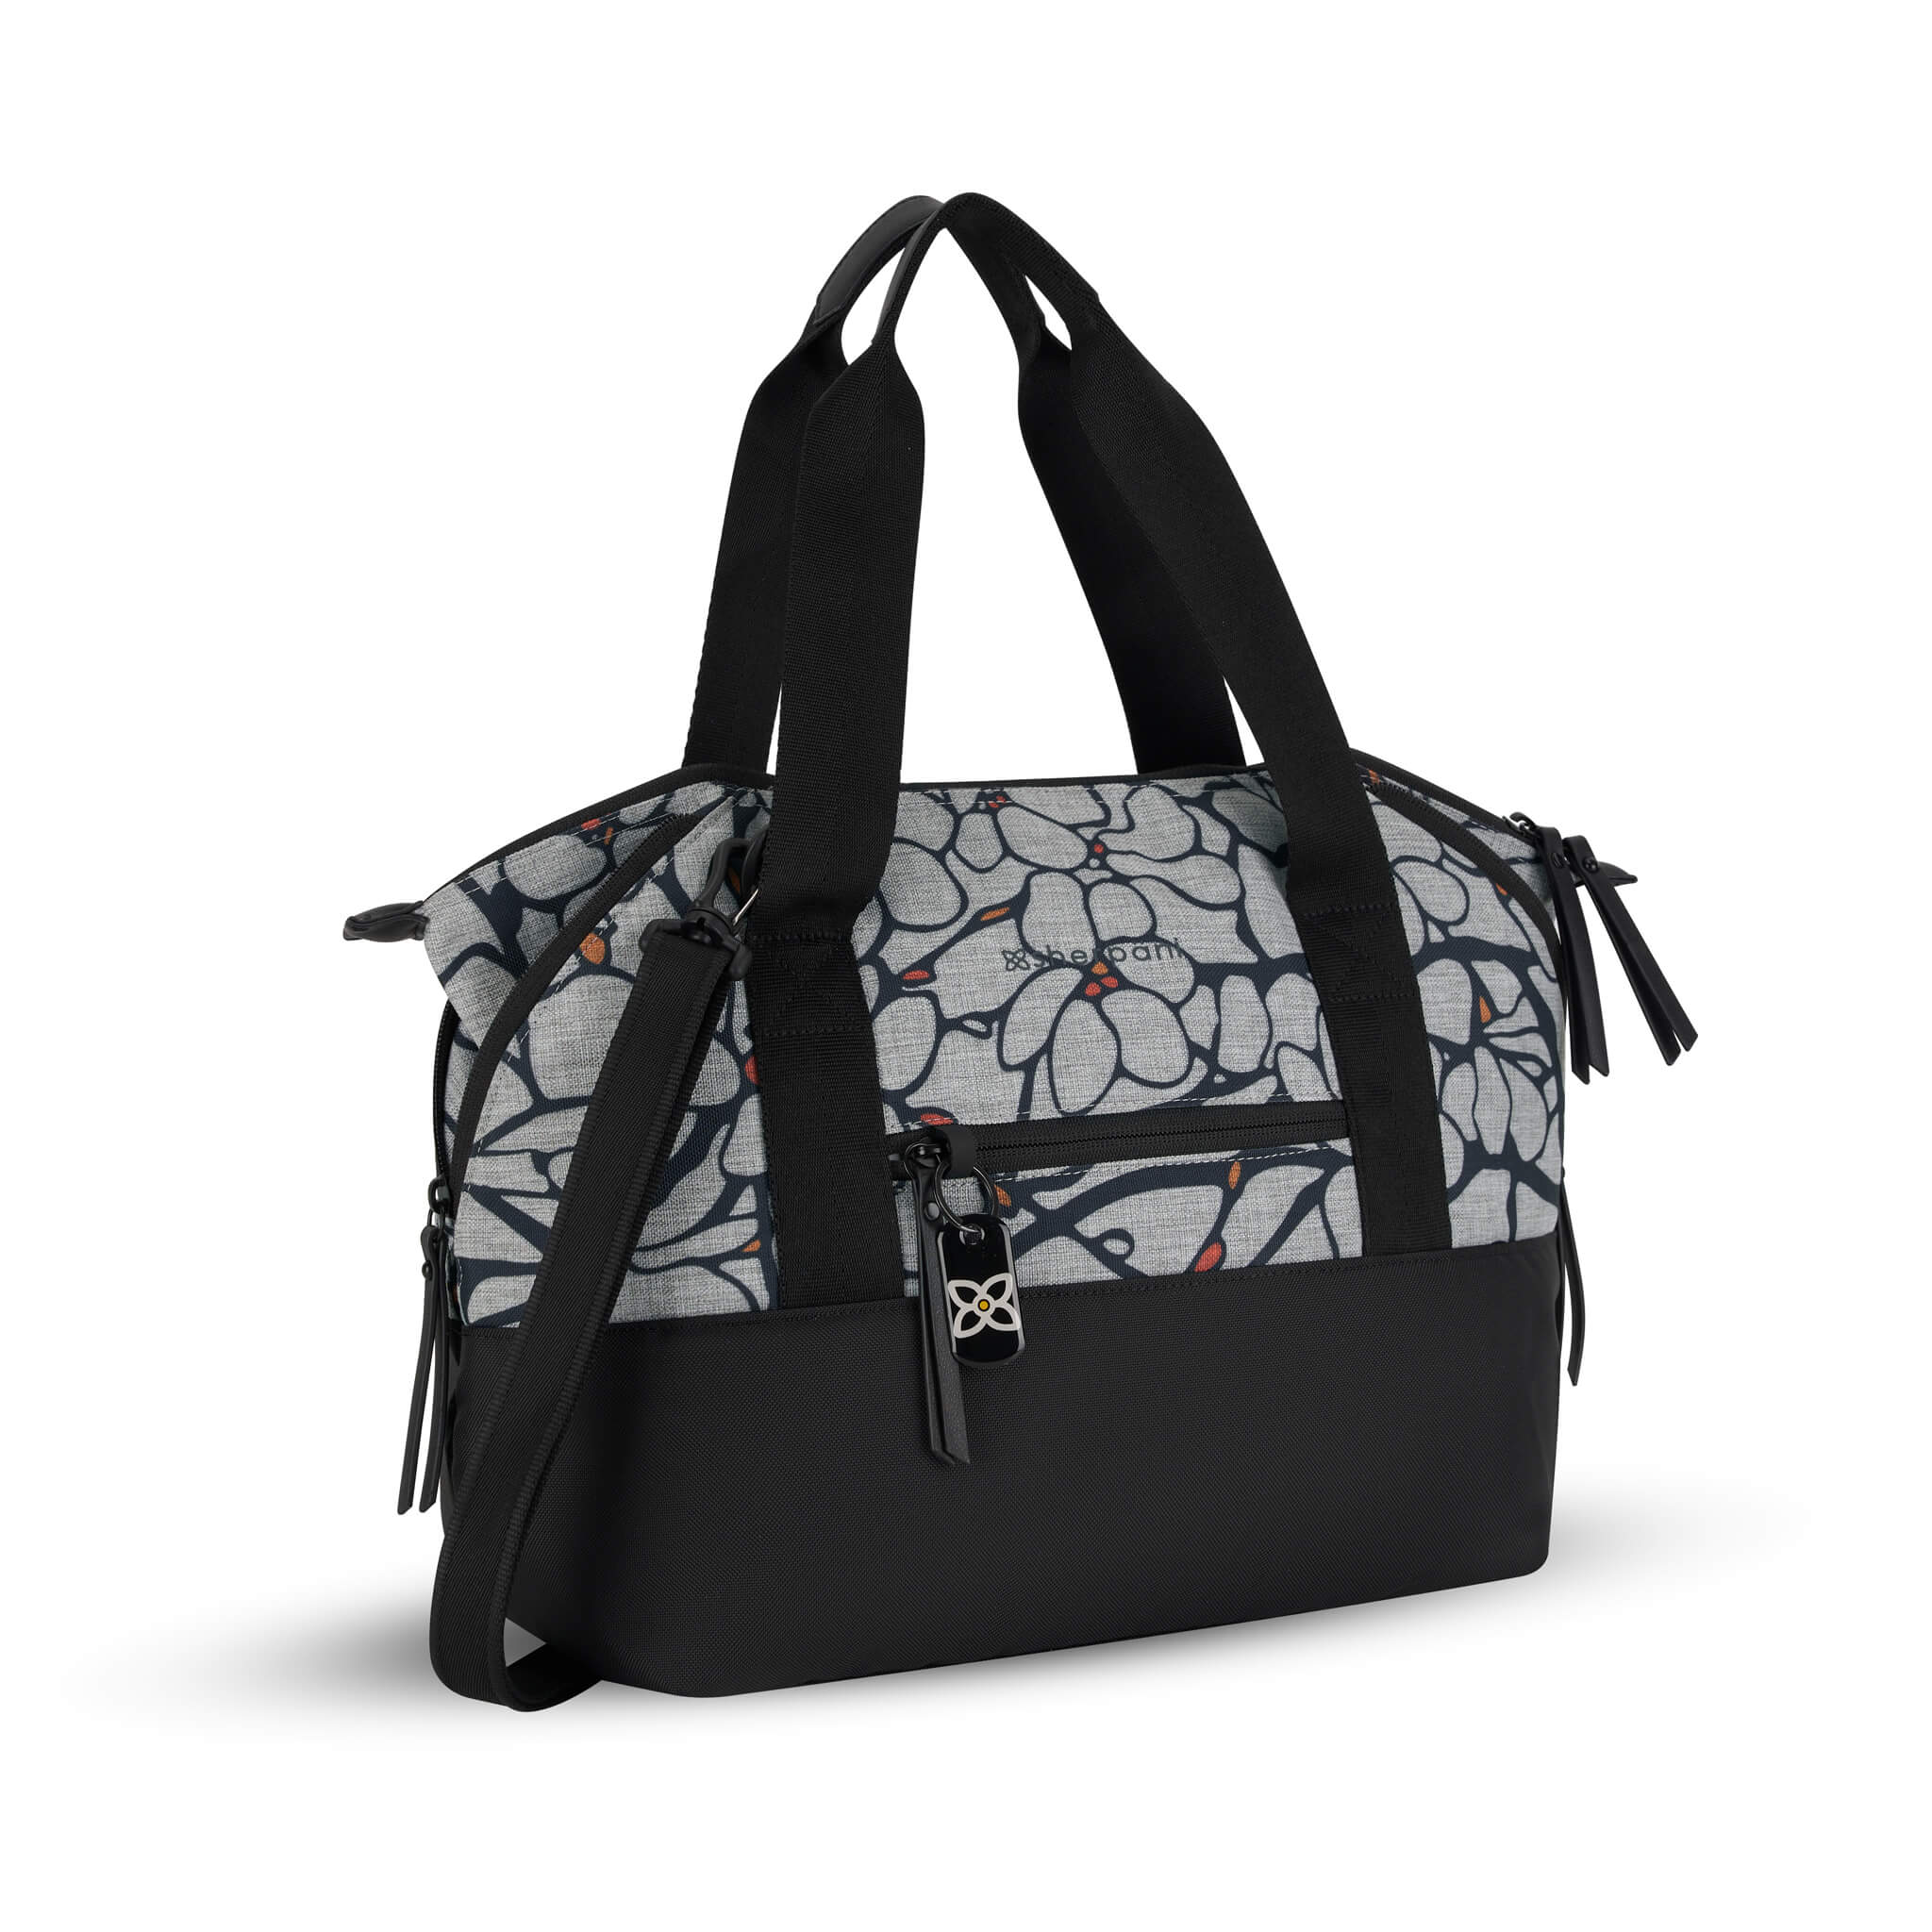 Front angled view of the Eclipse in Sakura. This travel tote features a zipper pocket in each corner which makes the Eclipse an expandable bag. This Anti-Theft purse is sustainably made from recycled materials including post consumer plastic and vegan leather. 